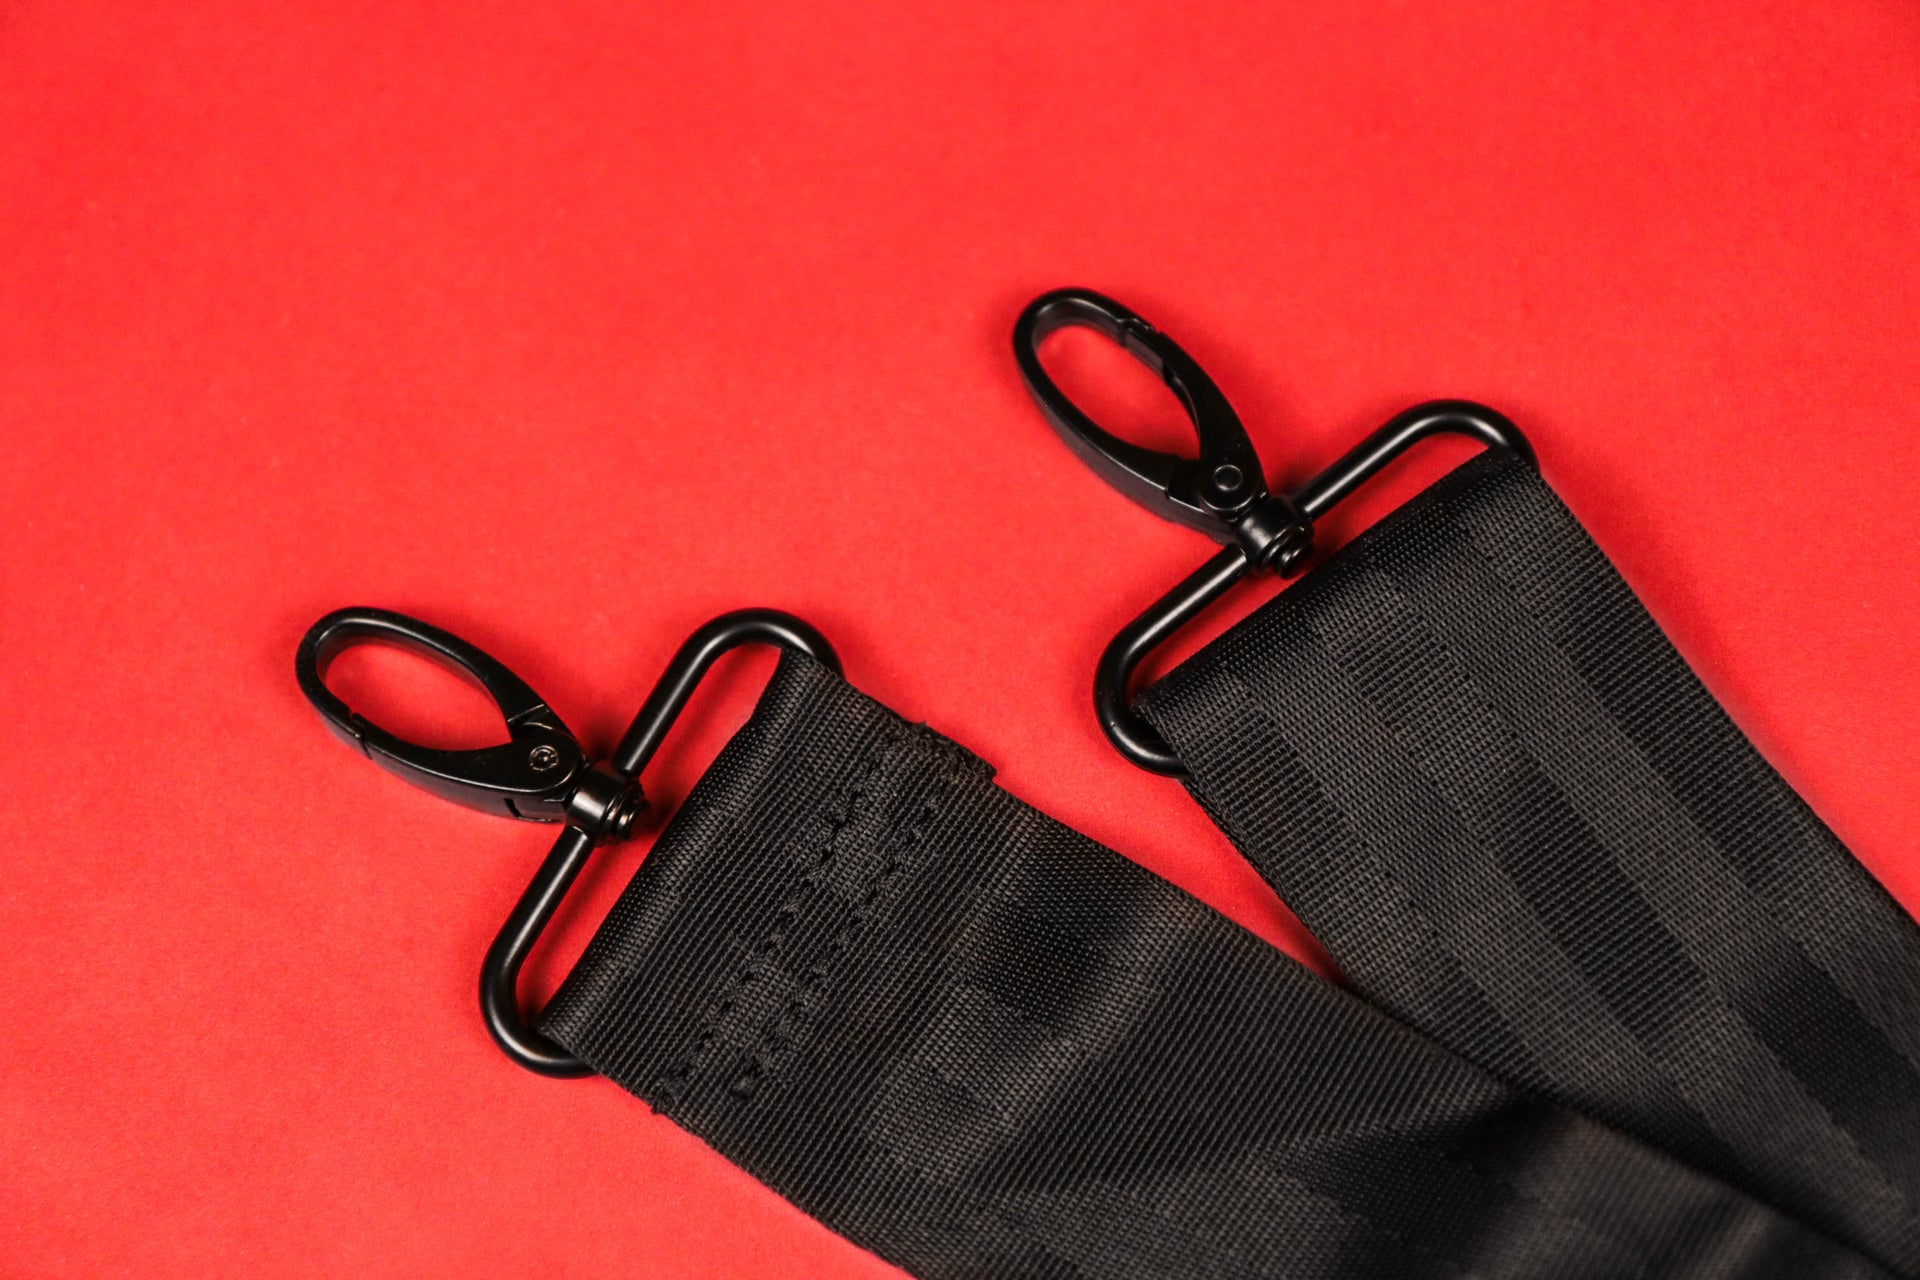 The clips on the Flight Pack Sneaker Duffle Bag To Match Bred 11s | Sneaker Duffel Travel Bag